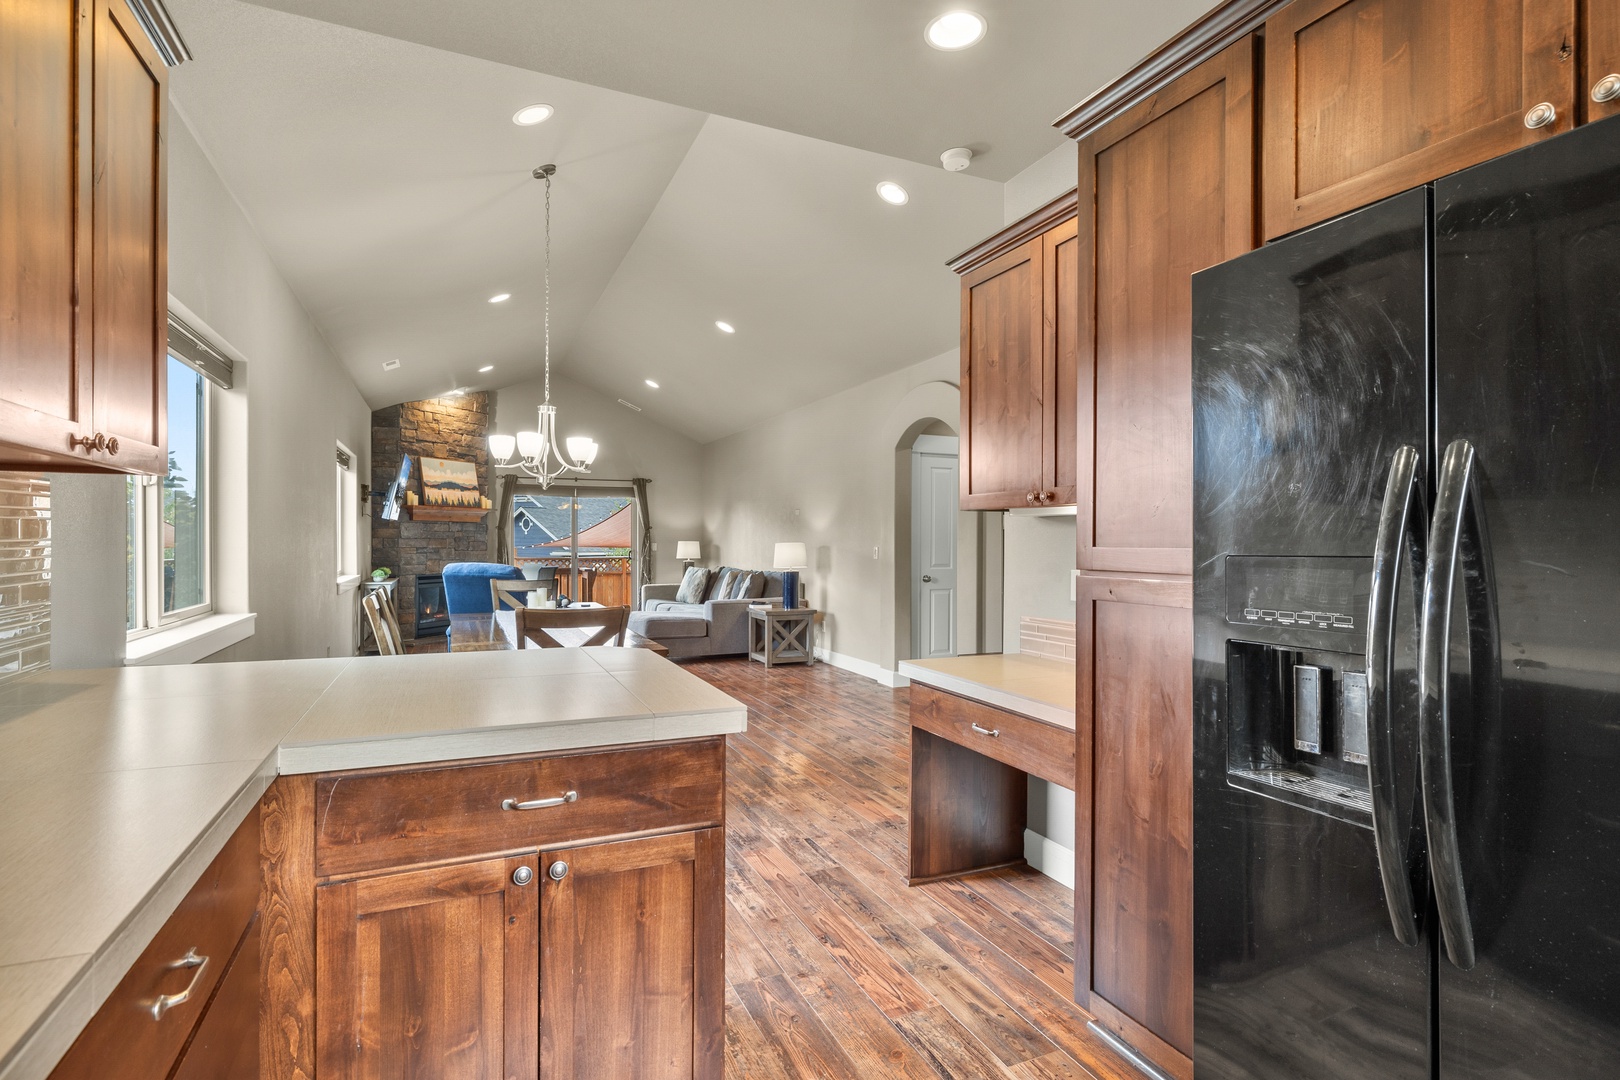 The kitchen offers ample storage/counter space & all the comforts of home